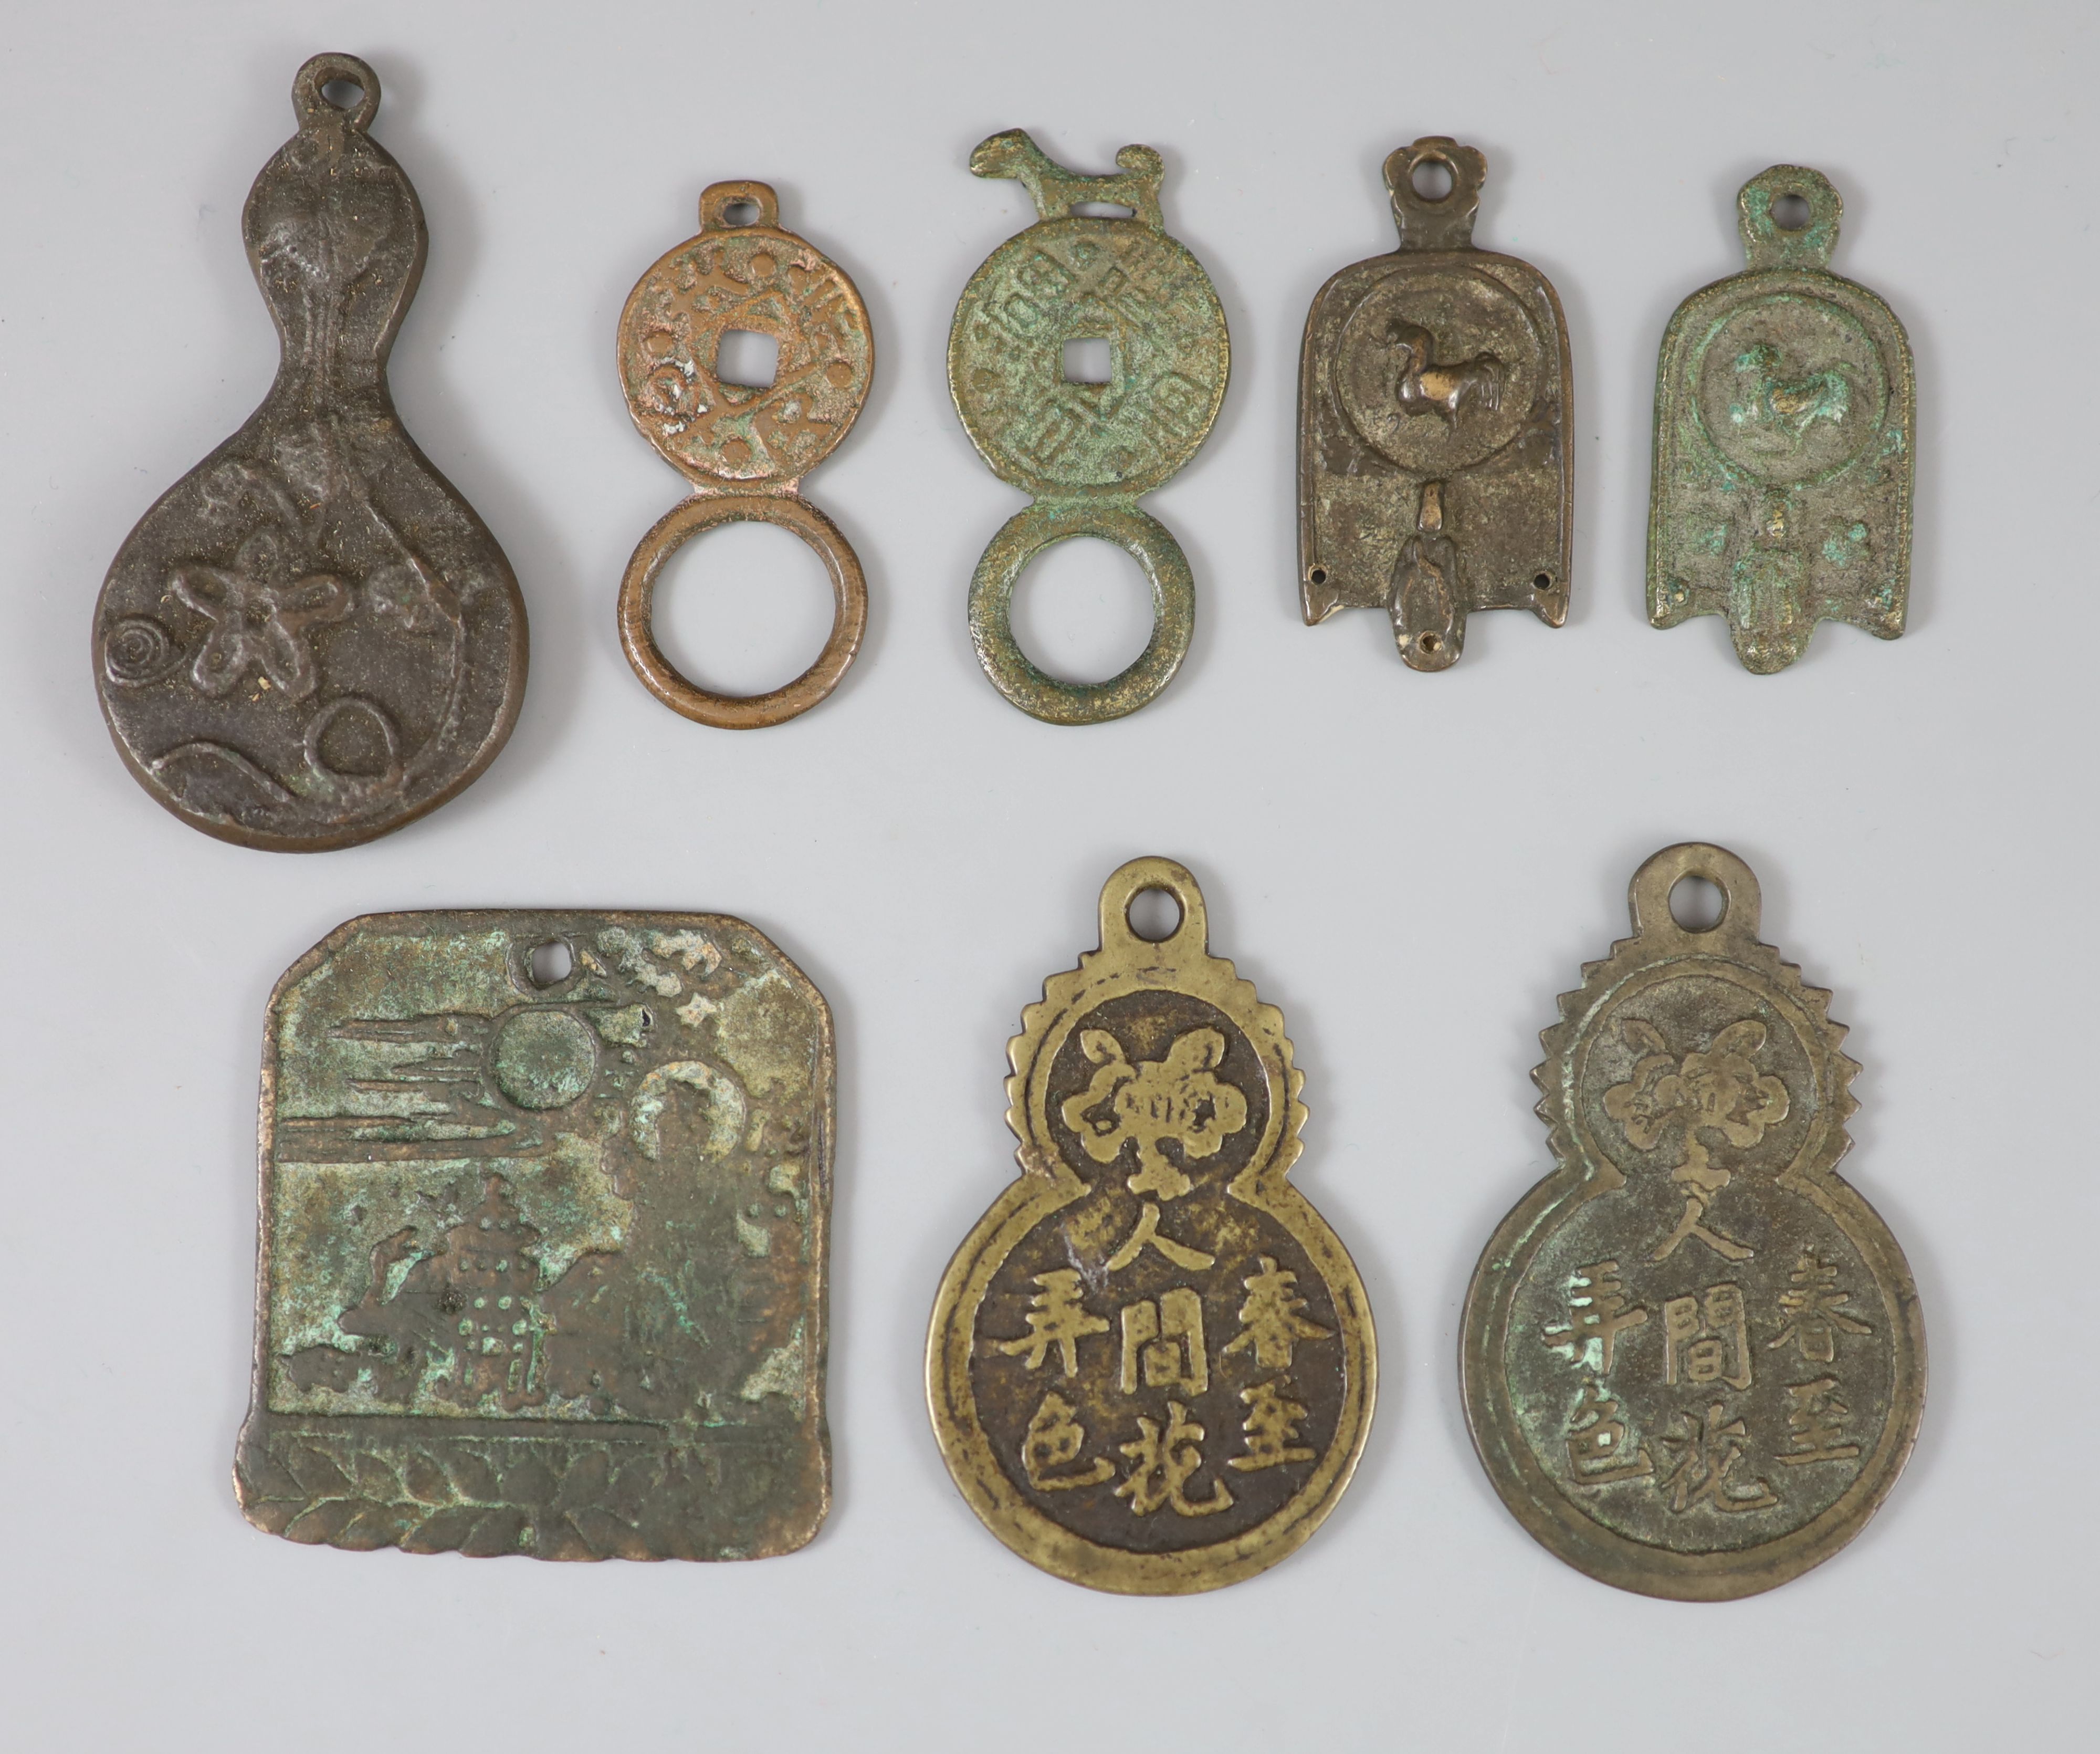 China, 8 bronze charms or amulets, Qing dynasty or earlier,